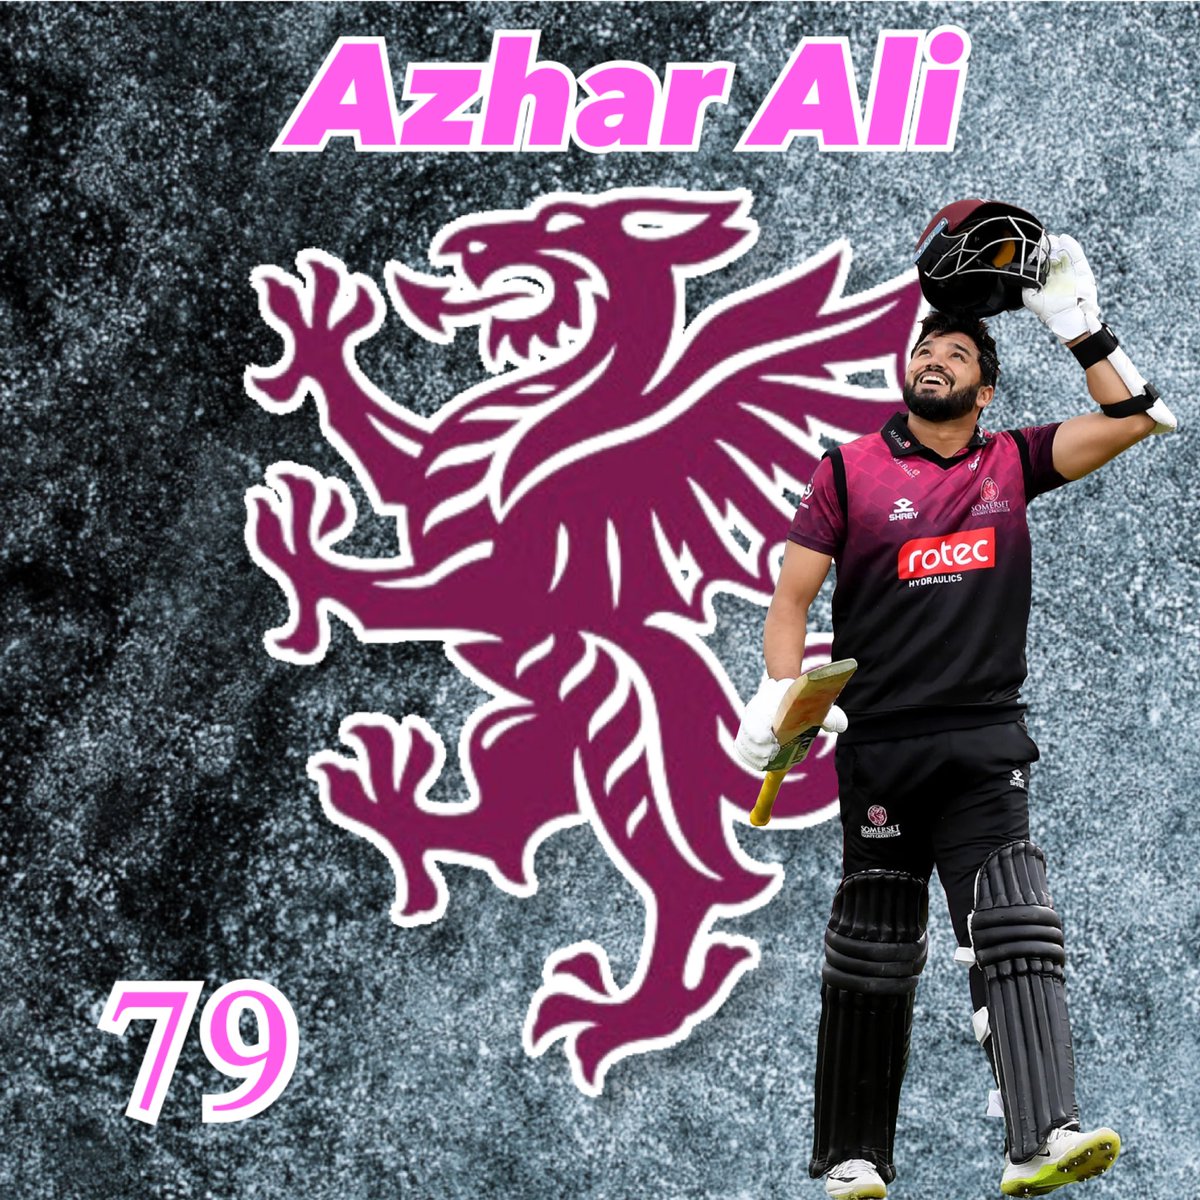 *Past Player Team Announcement* *Azhar Ali* #79 The former Pakistan International has captained his county in both Test Matches and One Day International’s. He has 7142 Test Match runs at an average of 42.26. We can’t wait to see @AzharAli_ back in Taunton.